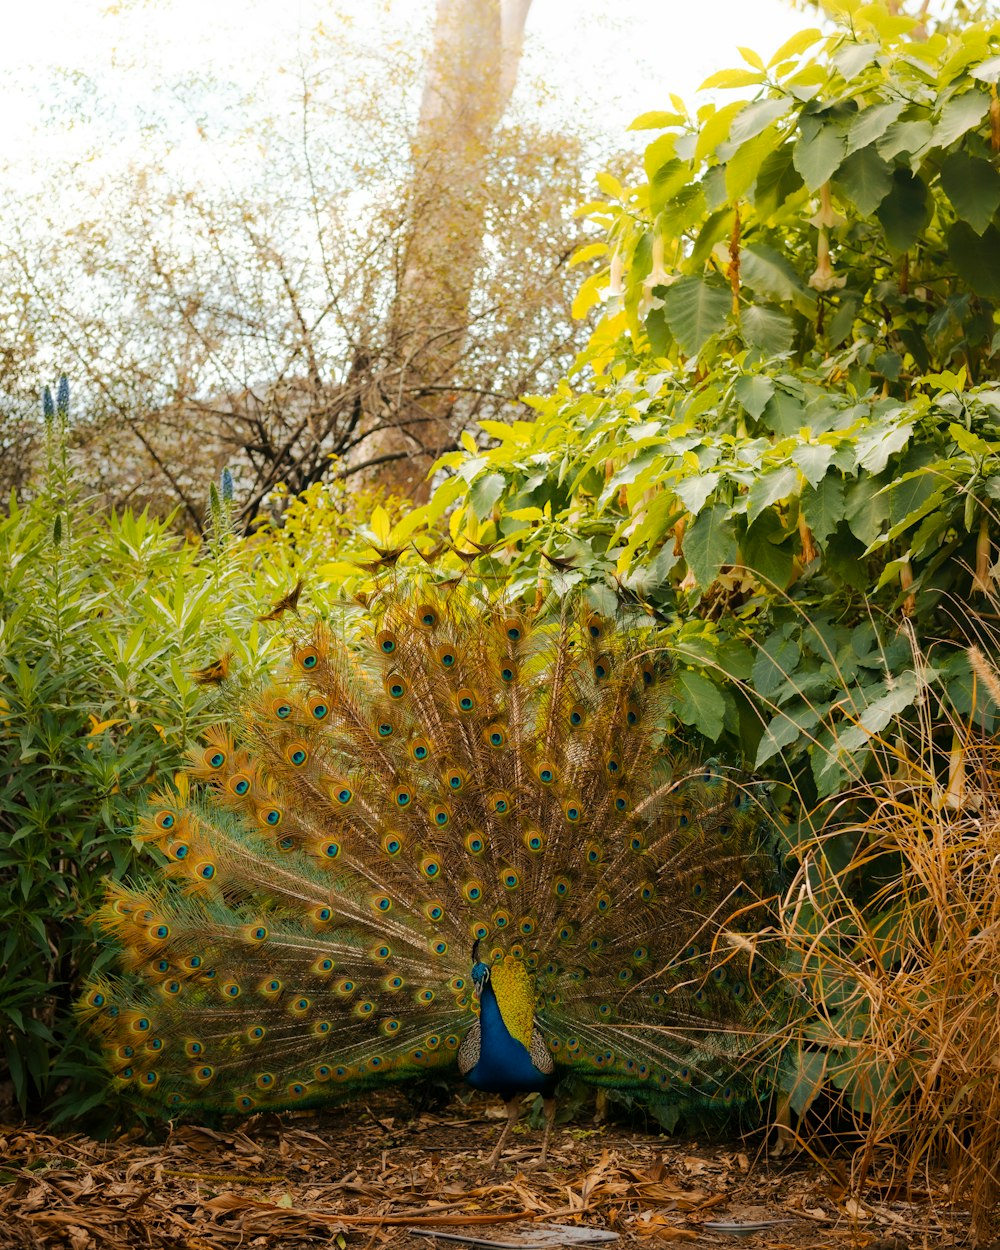 a peacock with its feathers spread out in front of a bush